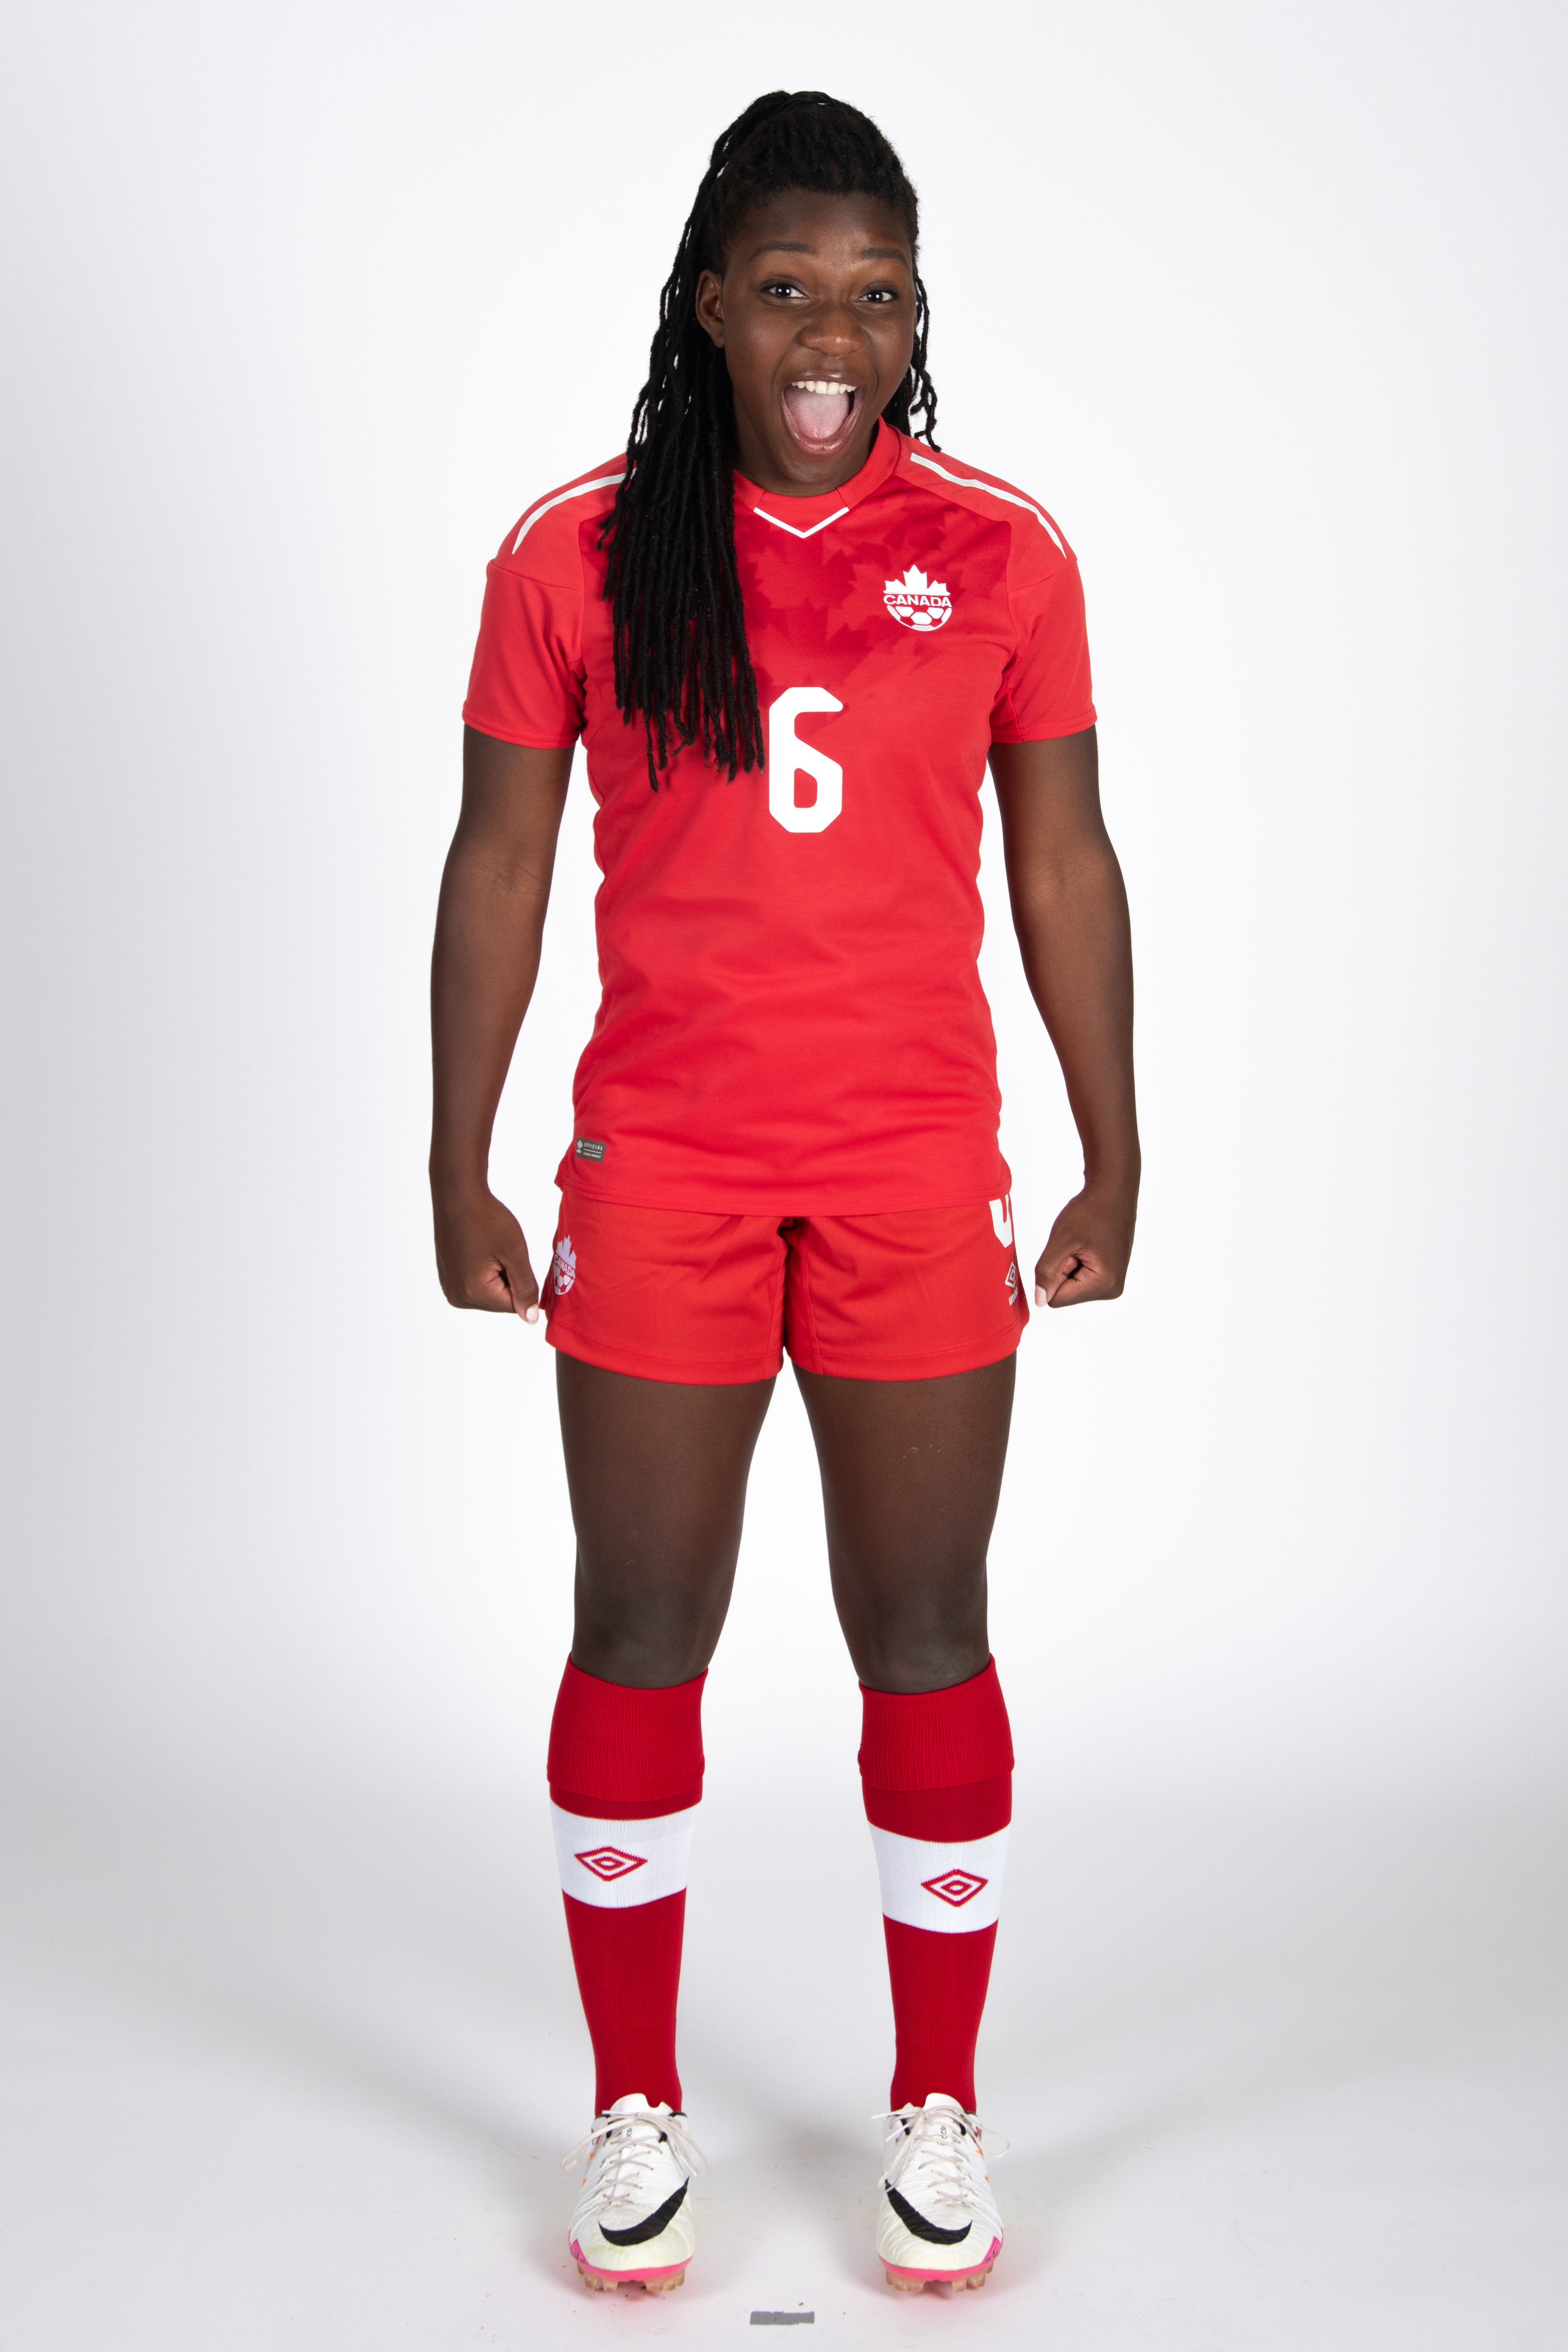 20180604_CANWNT_Rose_byBazyl10